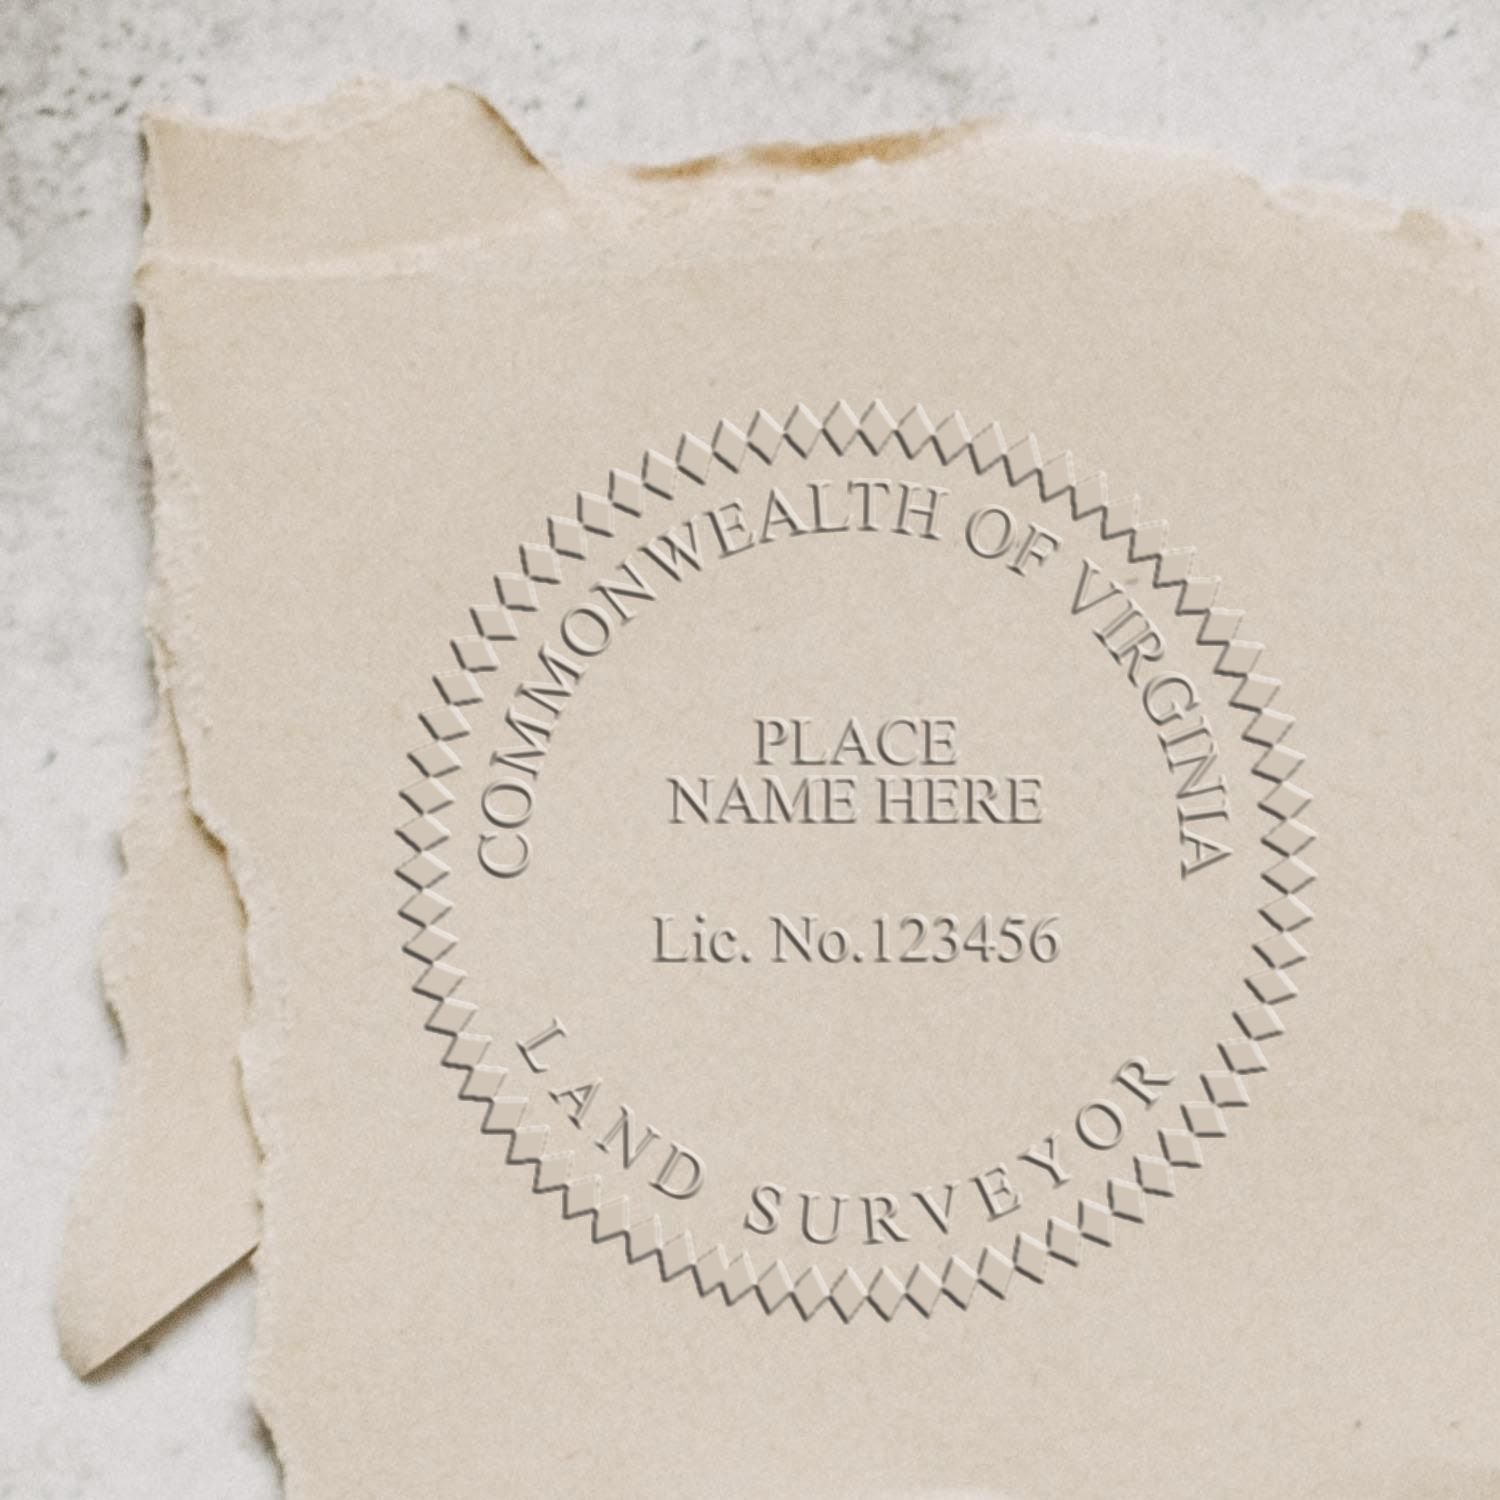 Another Example of a stamped impression of the Heavy Duty Cast Iron Virginia Land Surveyor Seal Embosser on a piece of office paper.